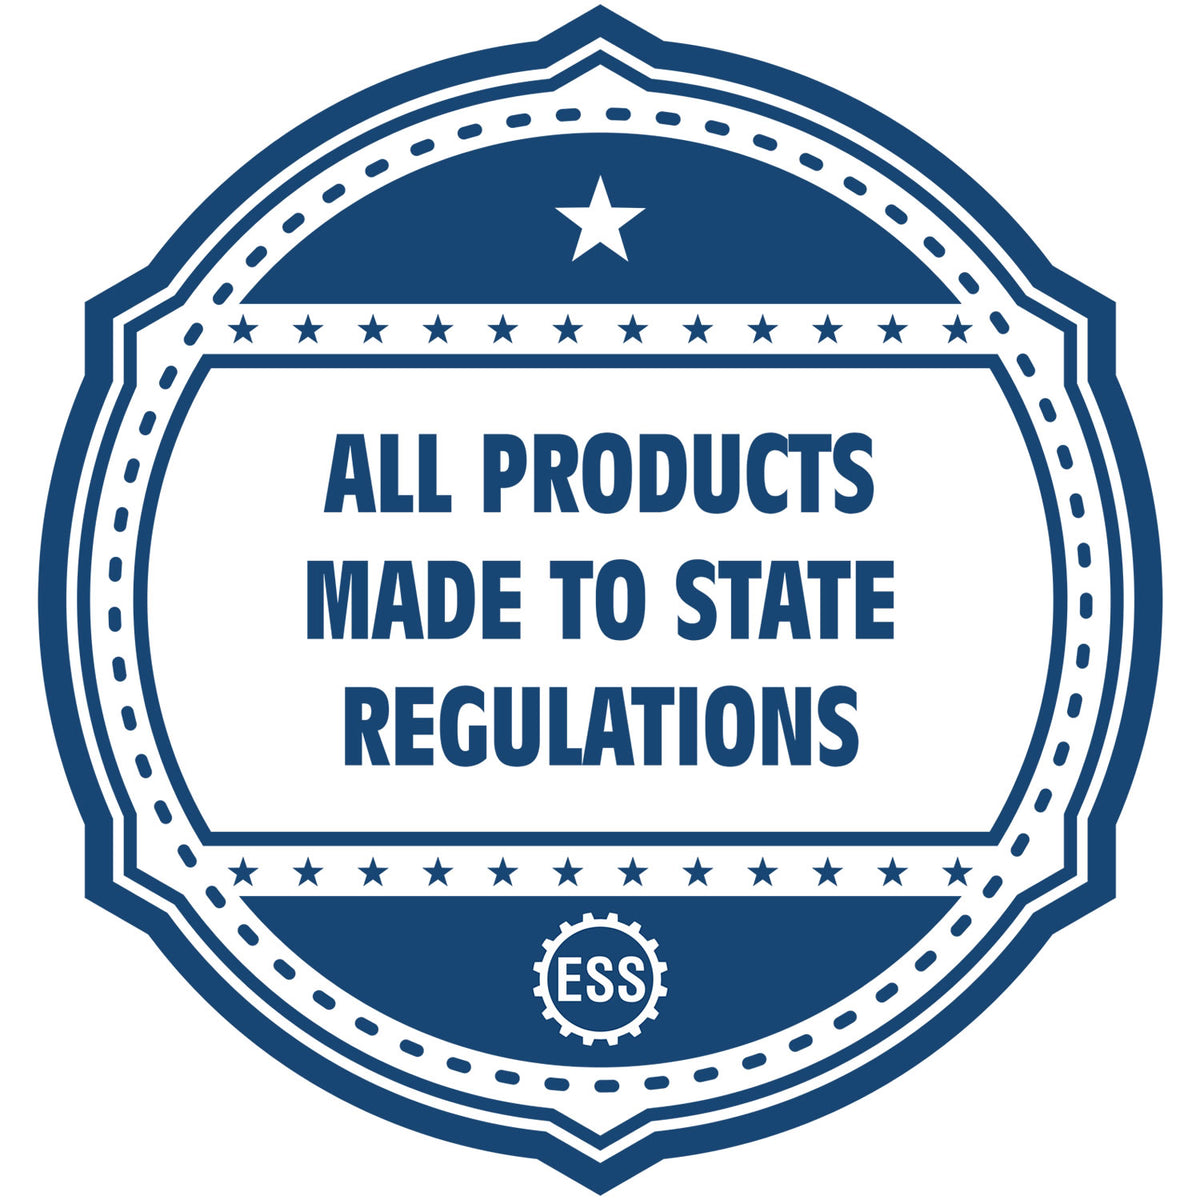 An icon or badge element for the Digital Connecticut Landscape Architect Stamp showing that this product is made in compliance with state regulations.